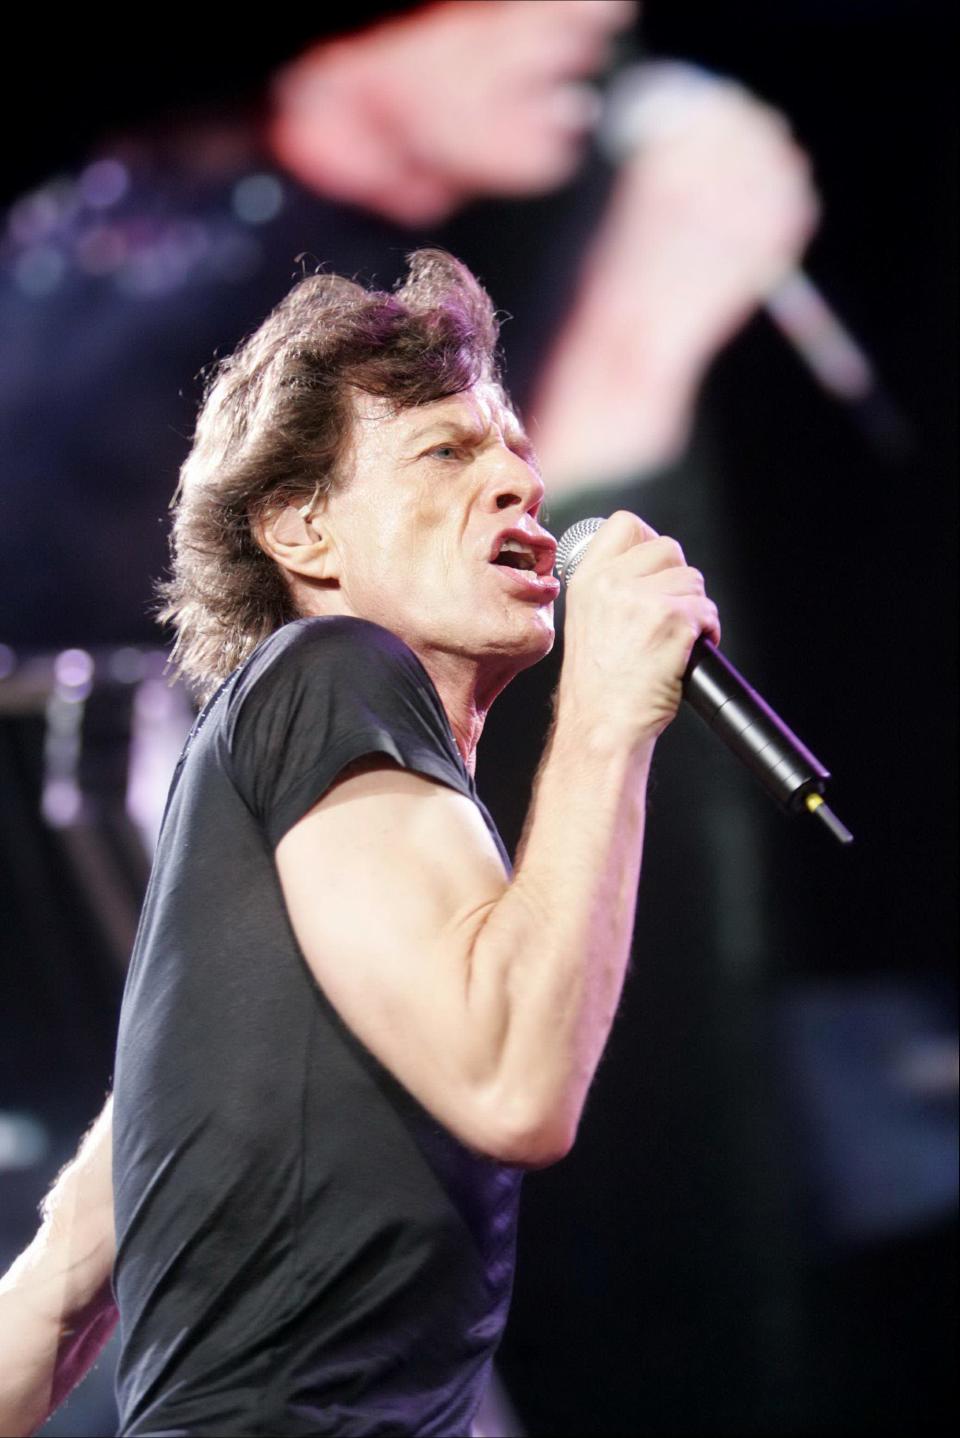 Mick Jagger and the Rolling Stones perform in 2005 at Giants Stadium in East Rutherford.